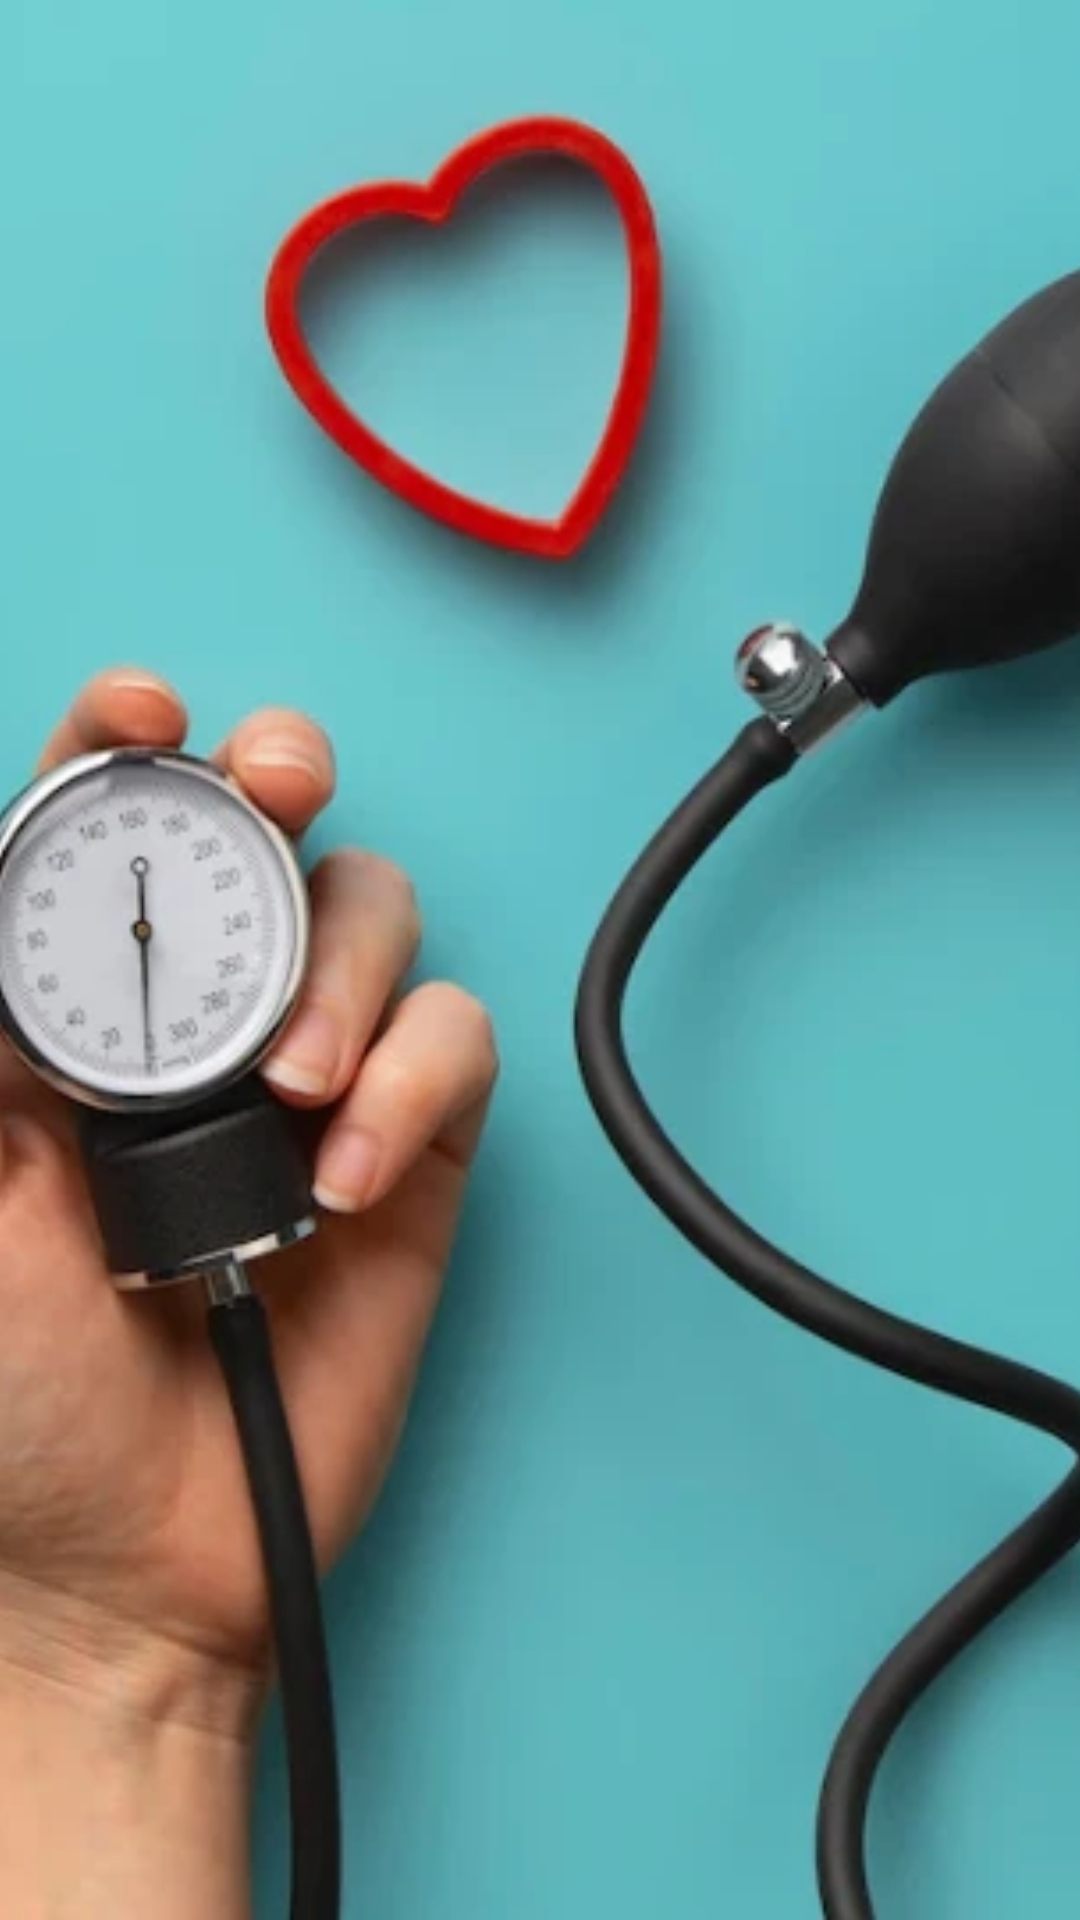 7 home remedies for low blood pressure?
